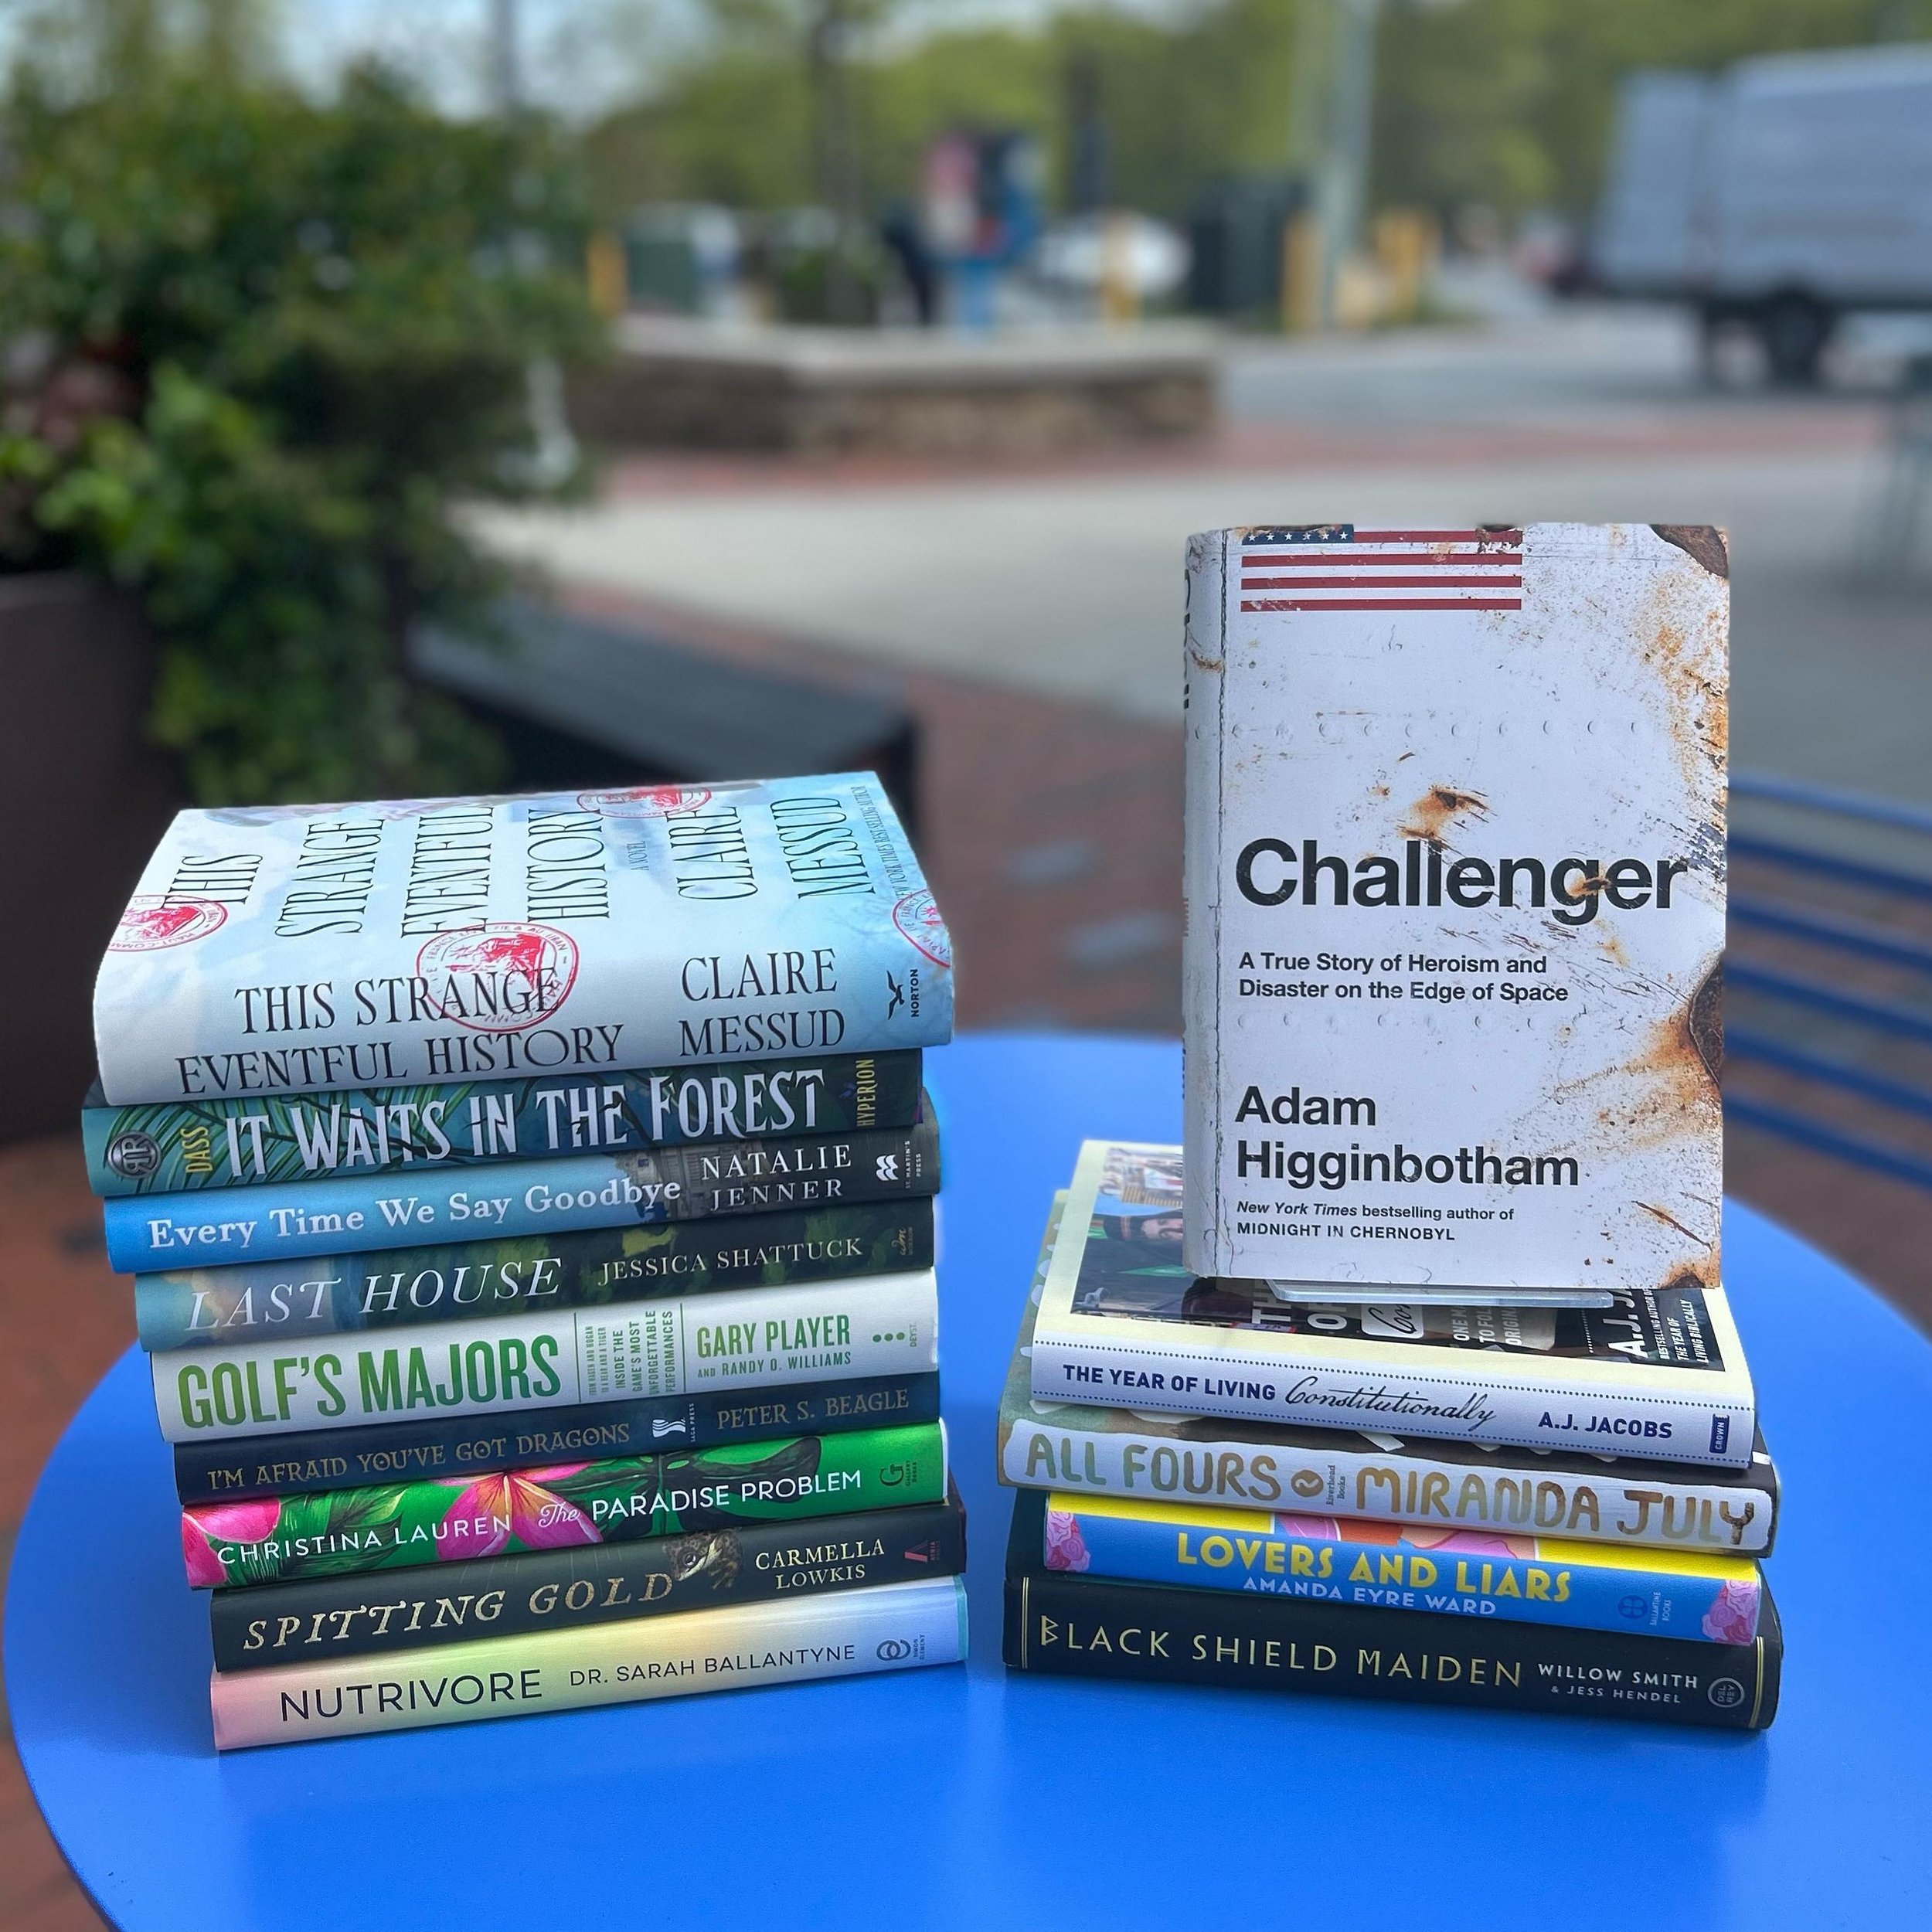 It&rsquo;s new release Tuesday! Enjoy this sunny day with a new book! Whether you like non fiction (check out Challenger by Adam Higginbotham) or fiction (we&rsquo;re so excited for @christinalauren The Paradise Problem), we&rsquo;ve got you covered!